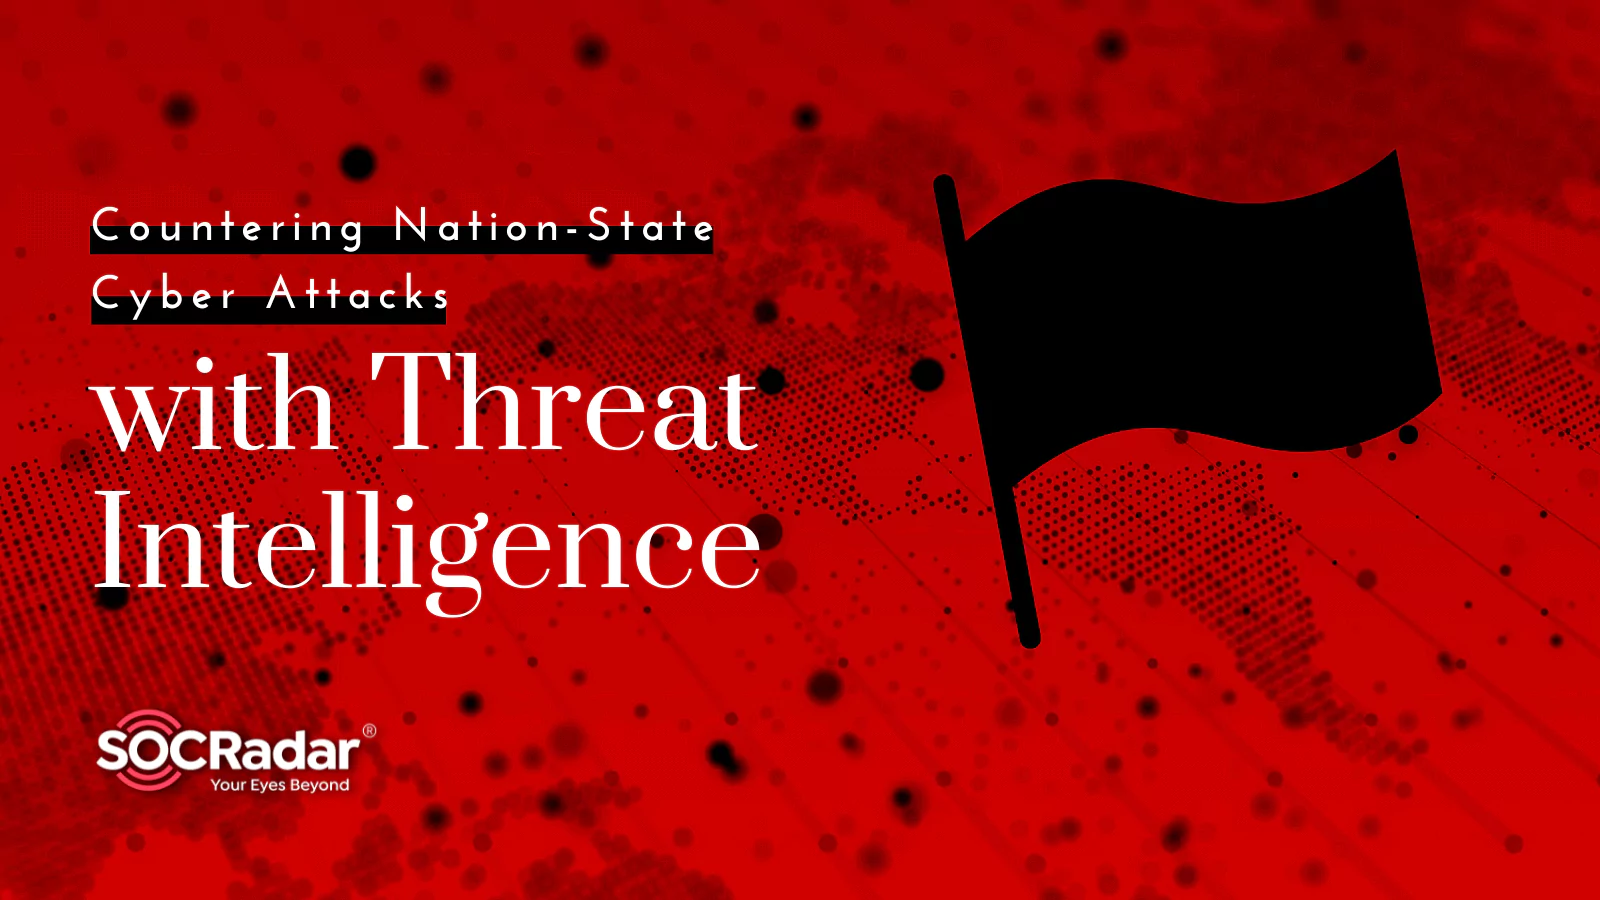 SOCRadar® Cyber Intelligence Inc. | Countering Nation-State Cyber Attacks with Threat Intelligence